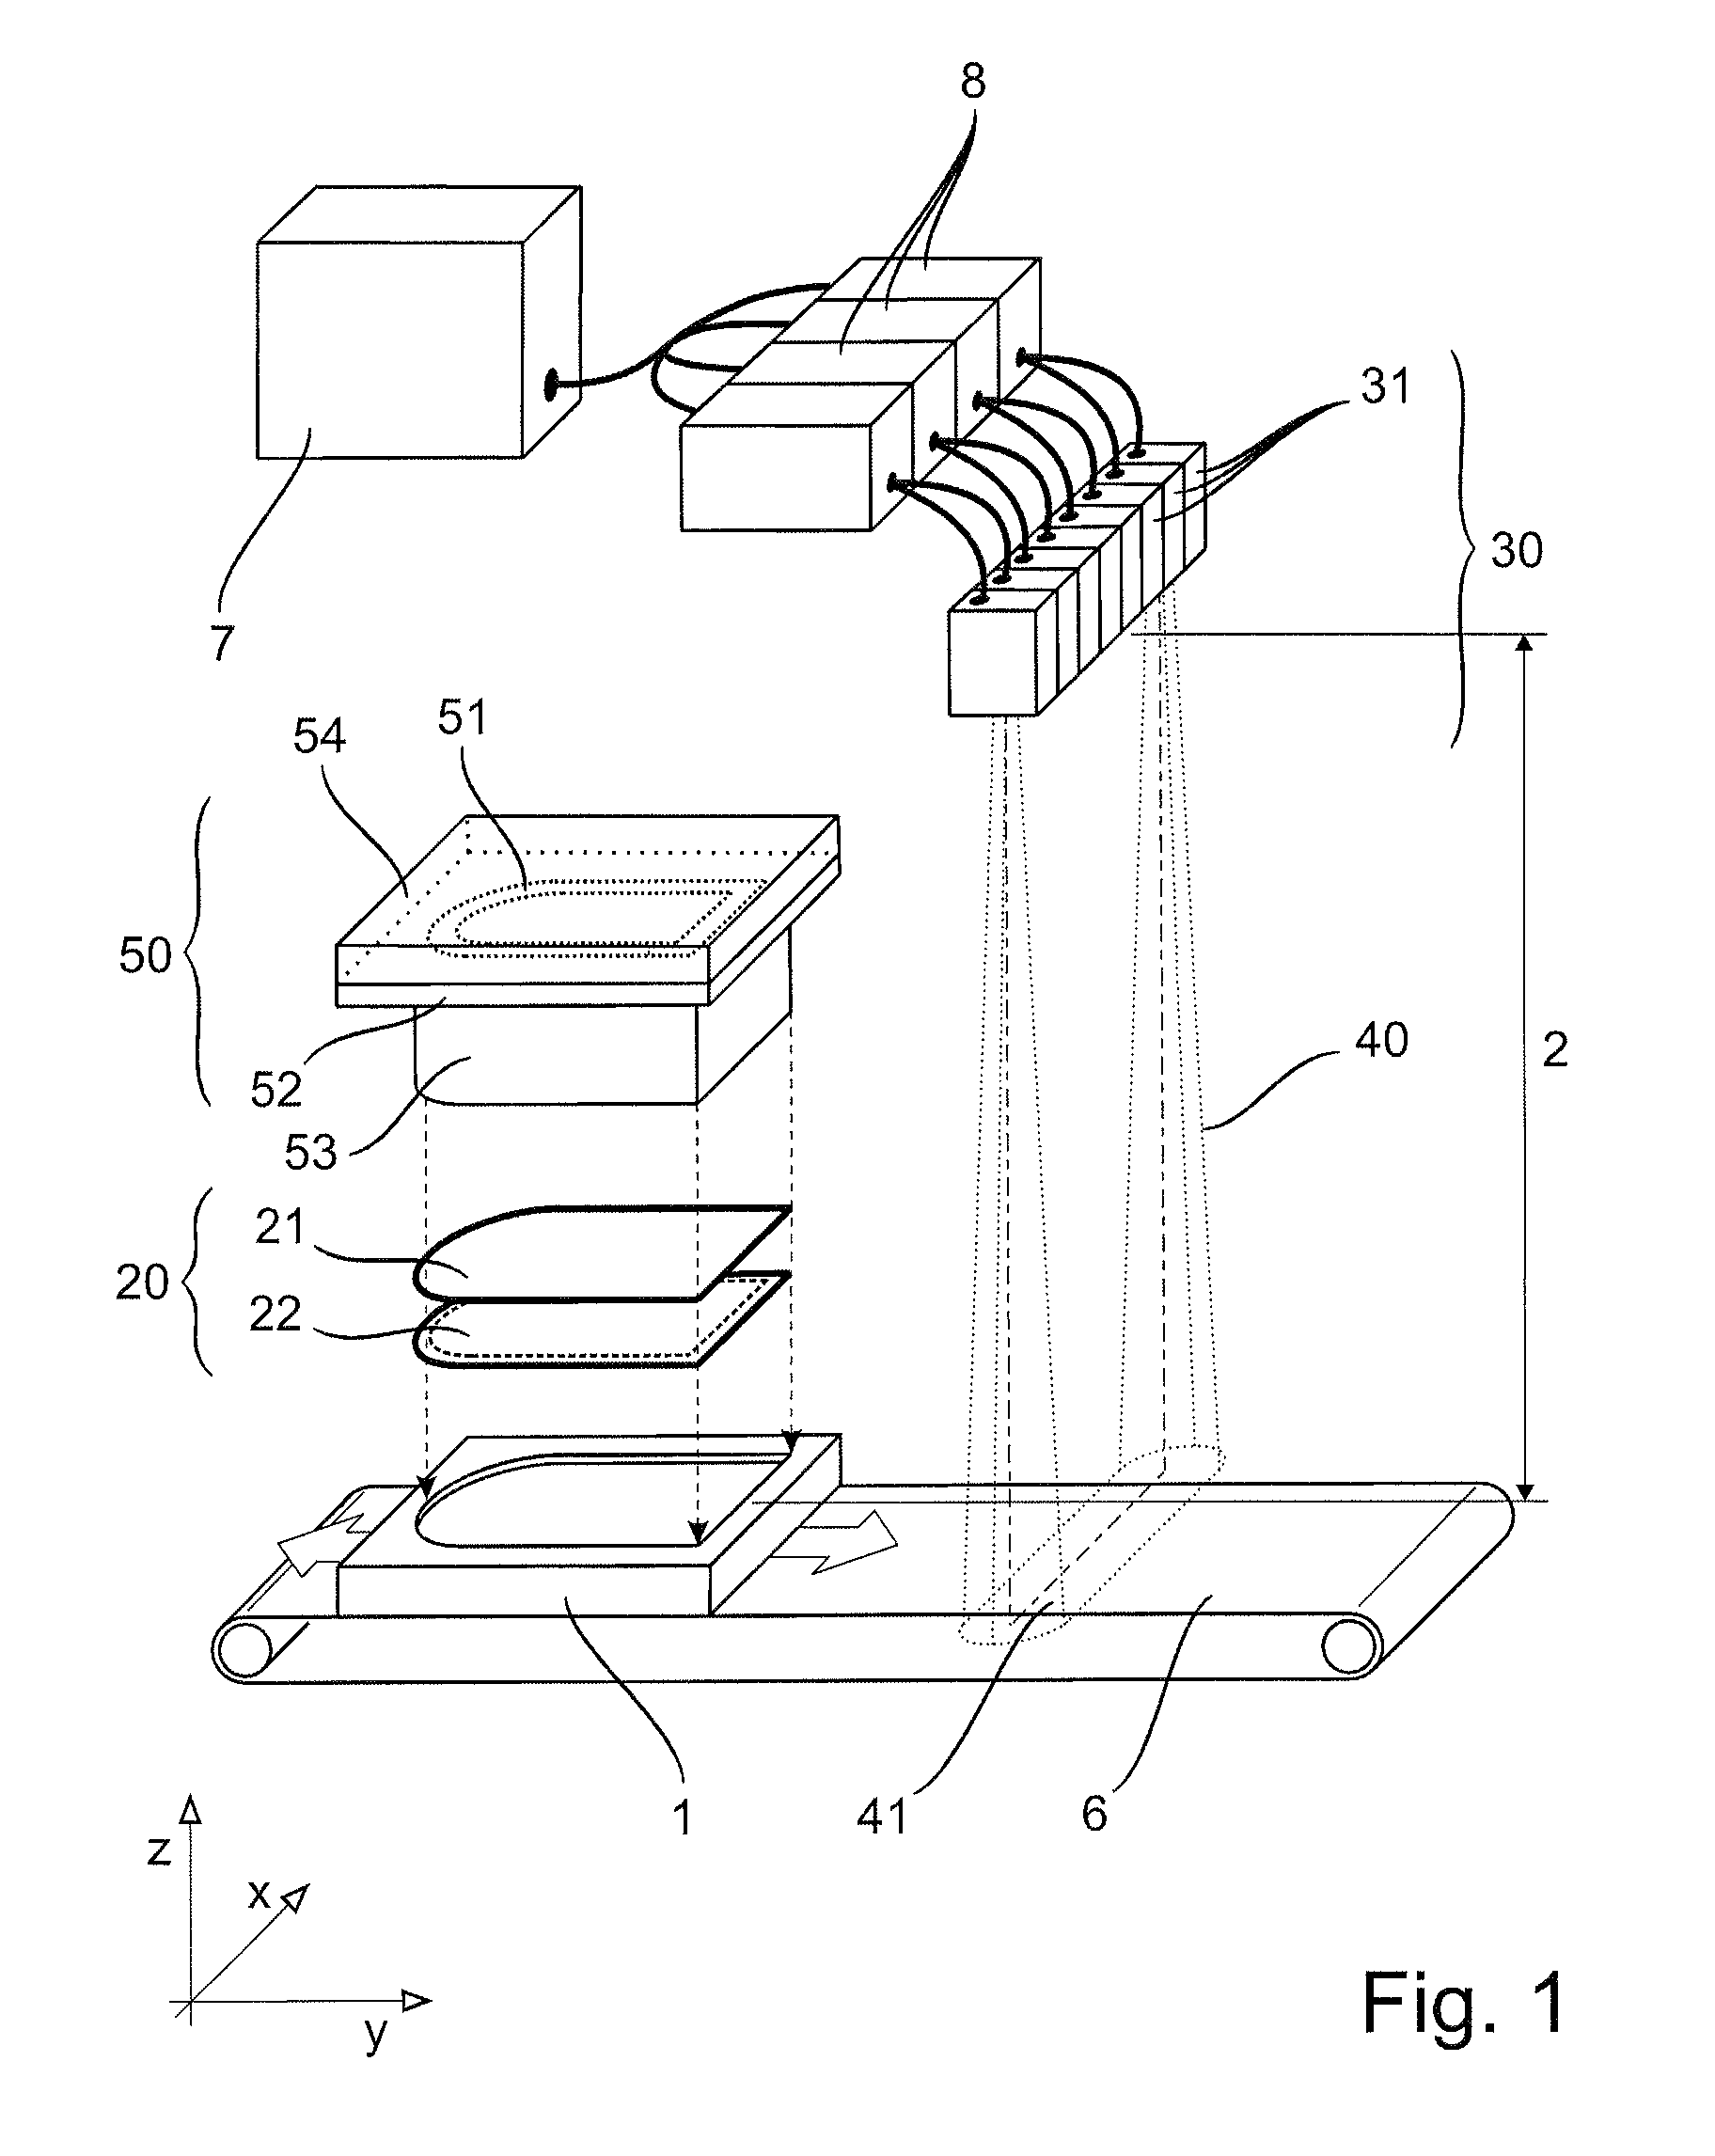 Apparatus for joining two workpiece parts along a weld by means of transmission welding